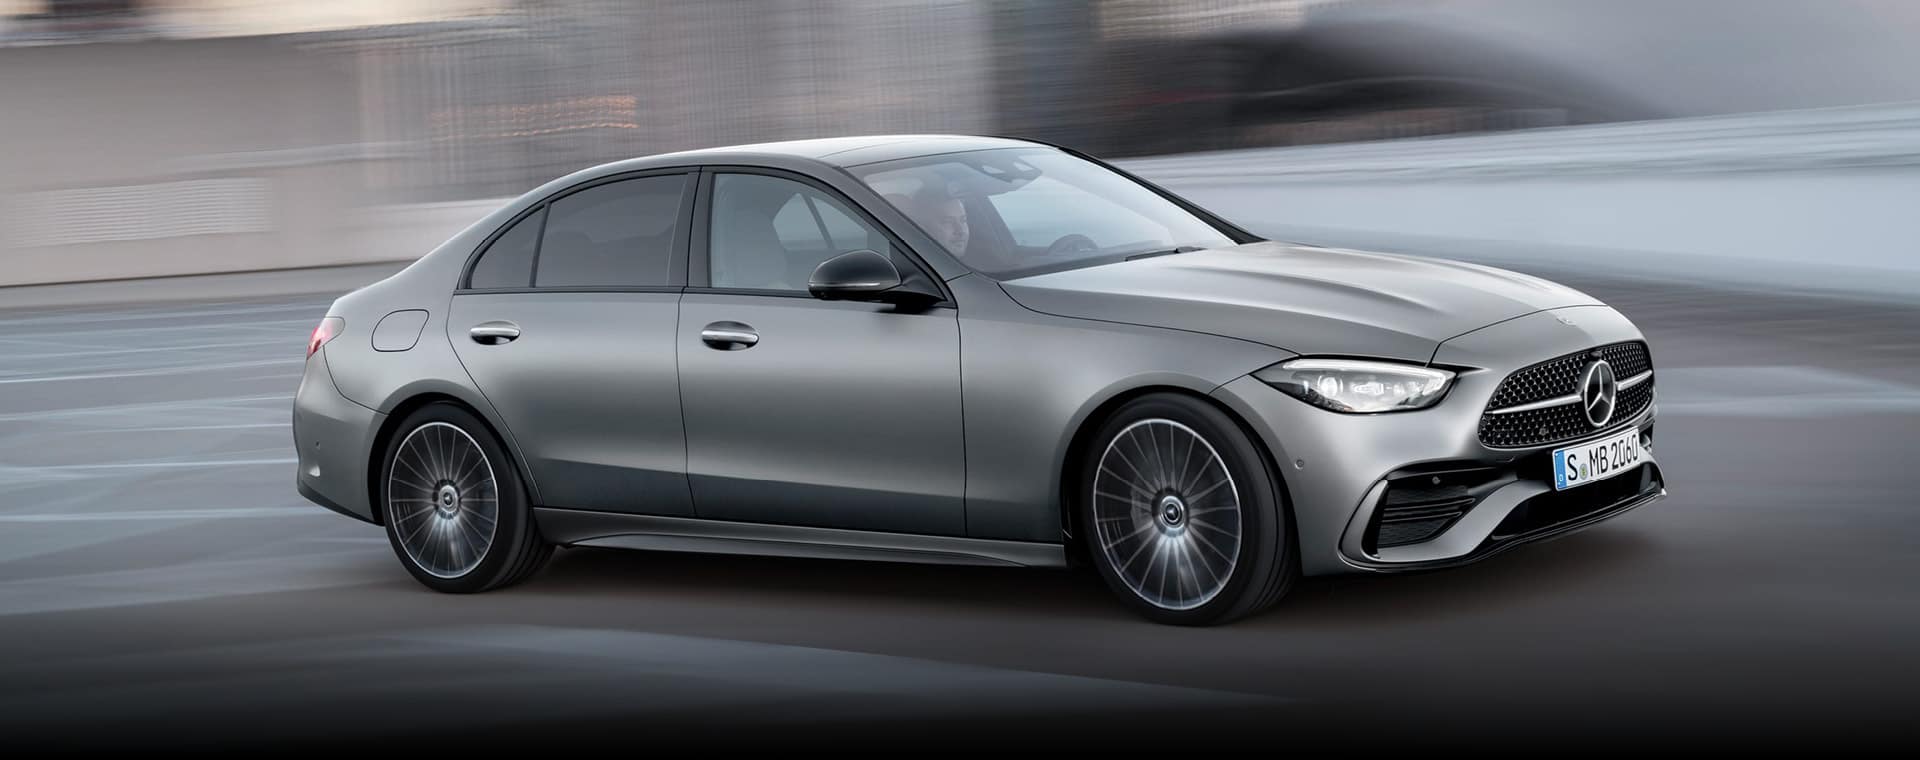 Unlike its previous iterations of the 2020 Mercedes-Benz C-class or the 2021 Mercedes Benz c class, the 2023 Mercedes-Benz C class is a luxury sedan for the masses.